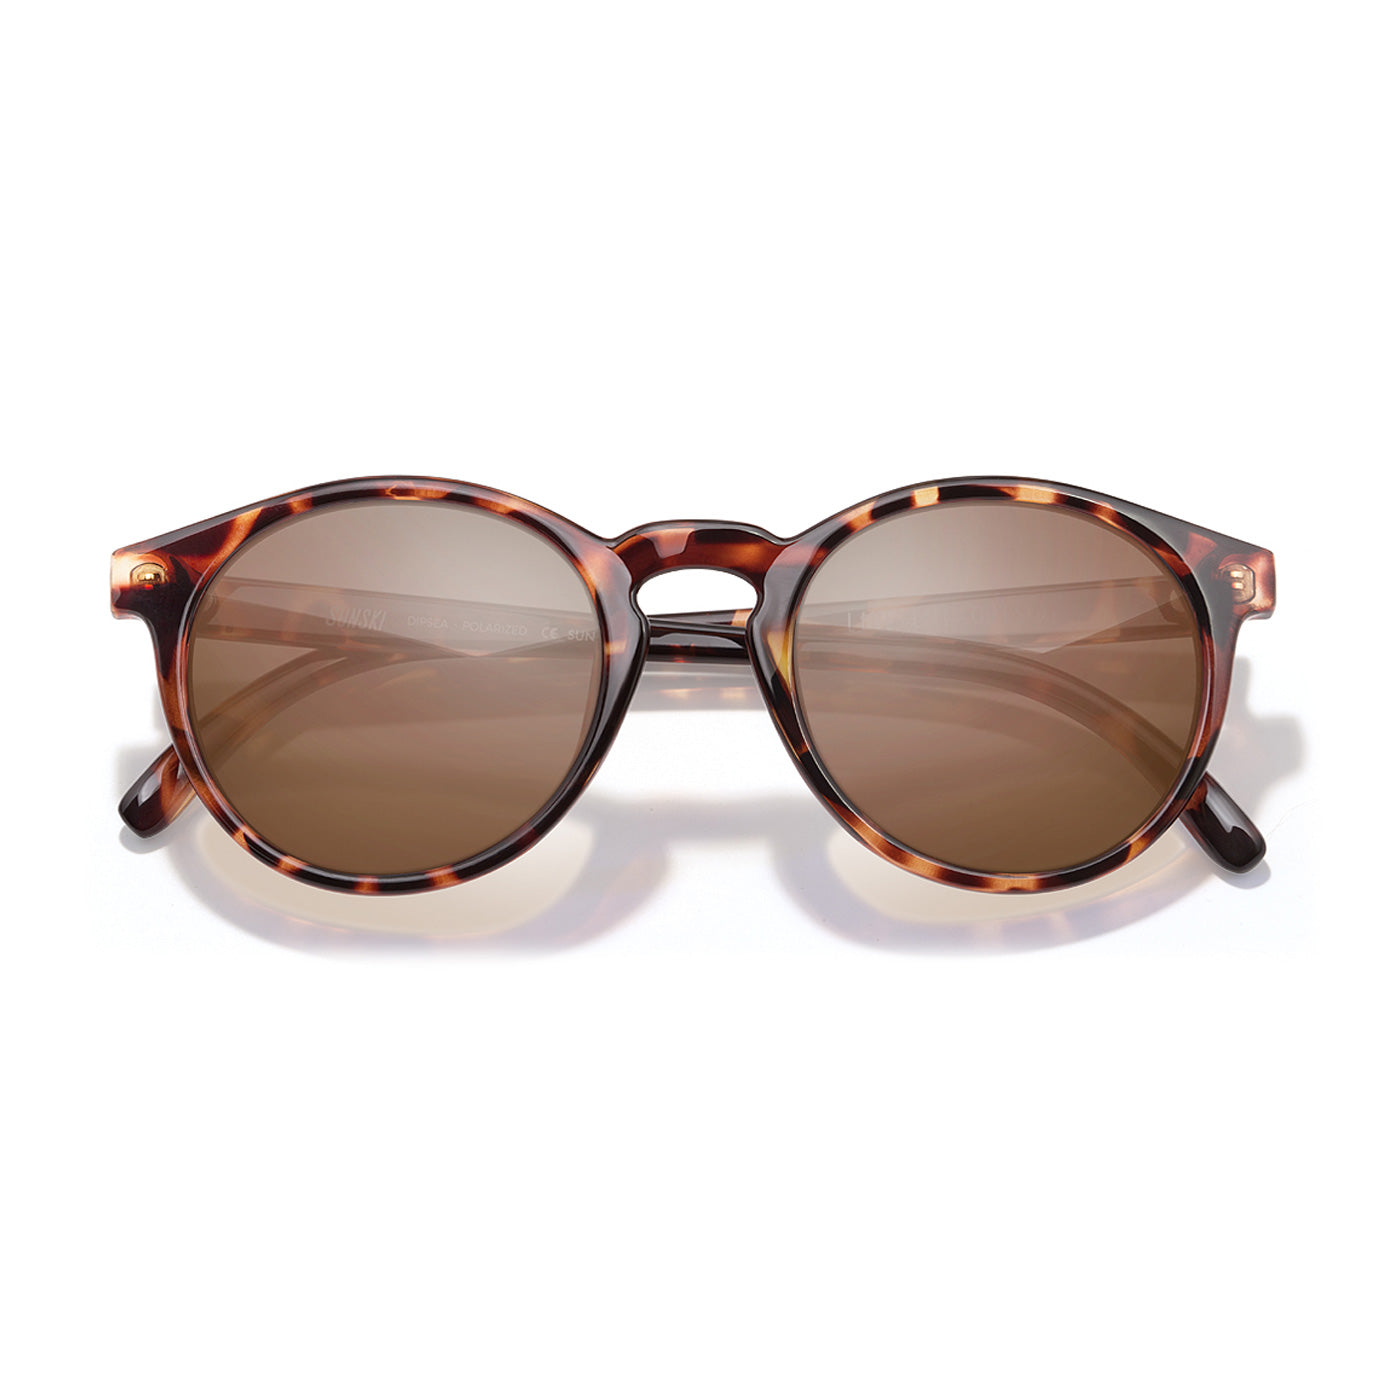 Tortoise Dipsea with brown lenses sunglasses by Sunski